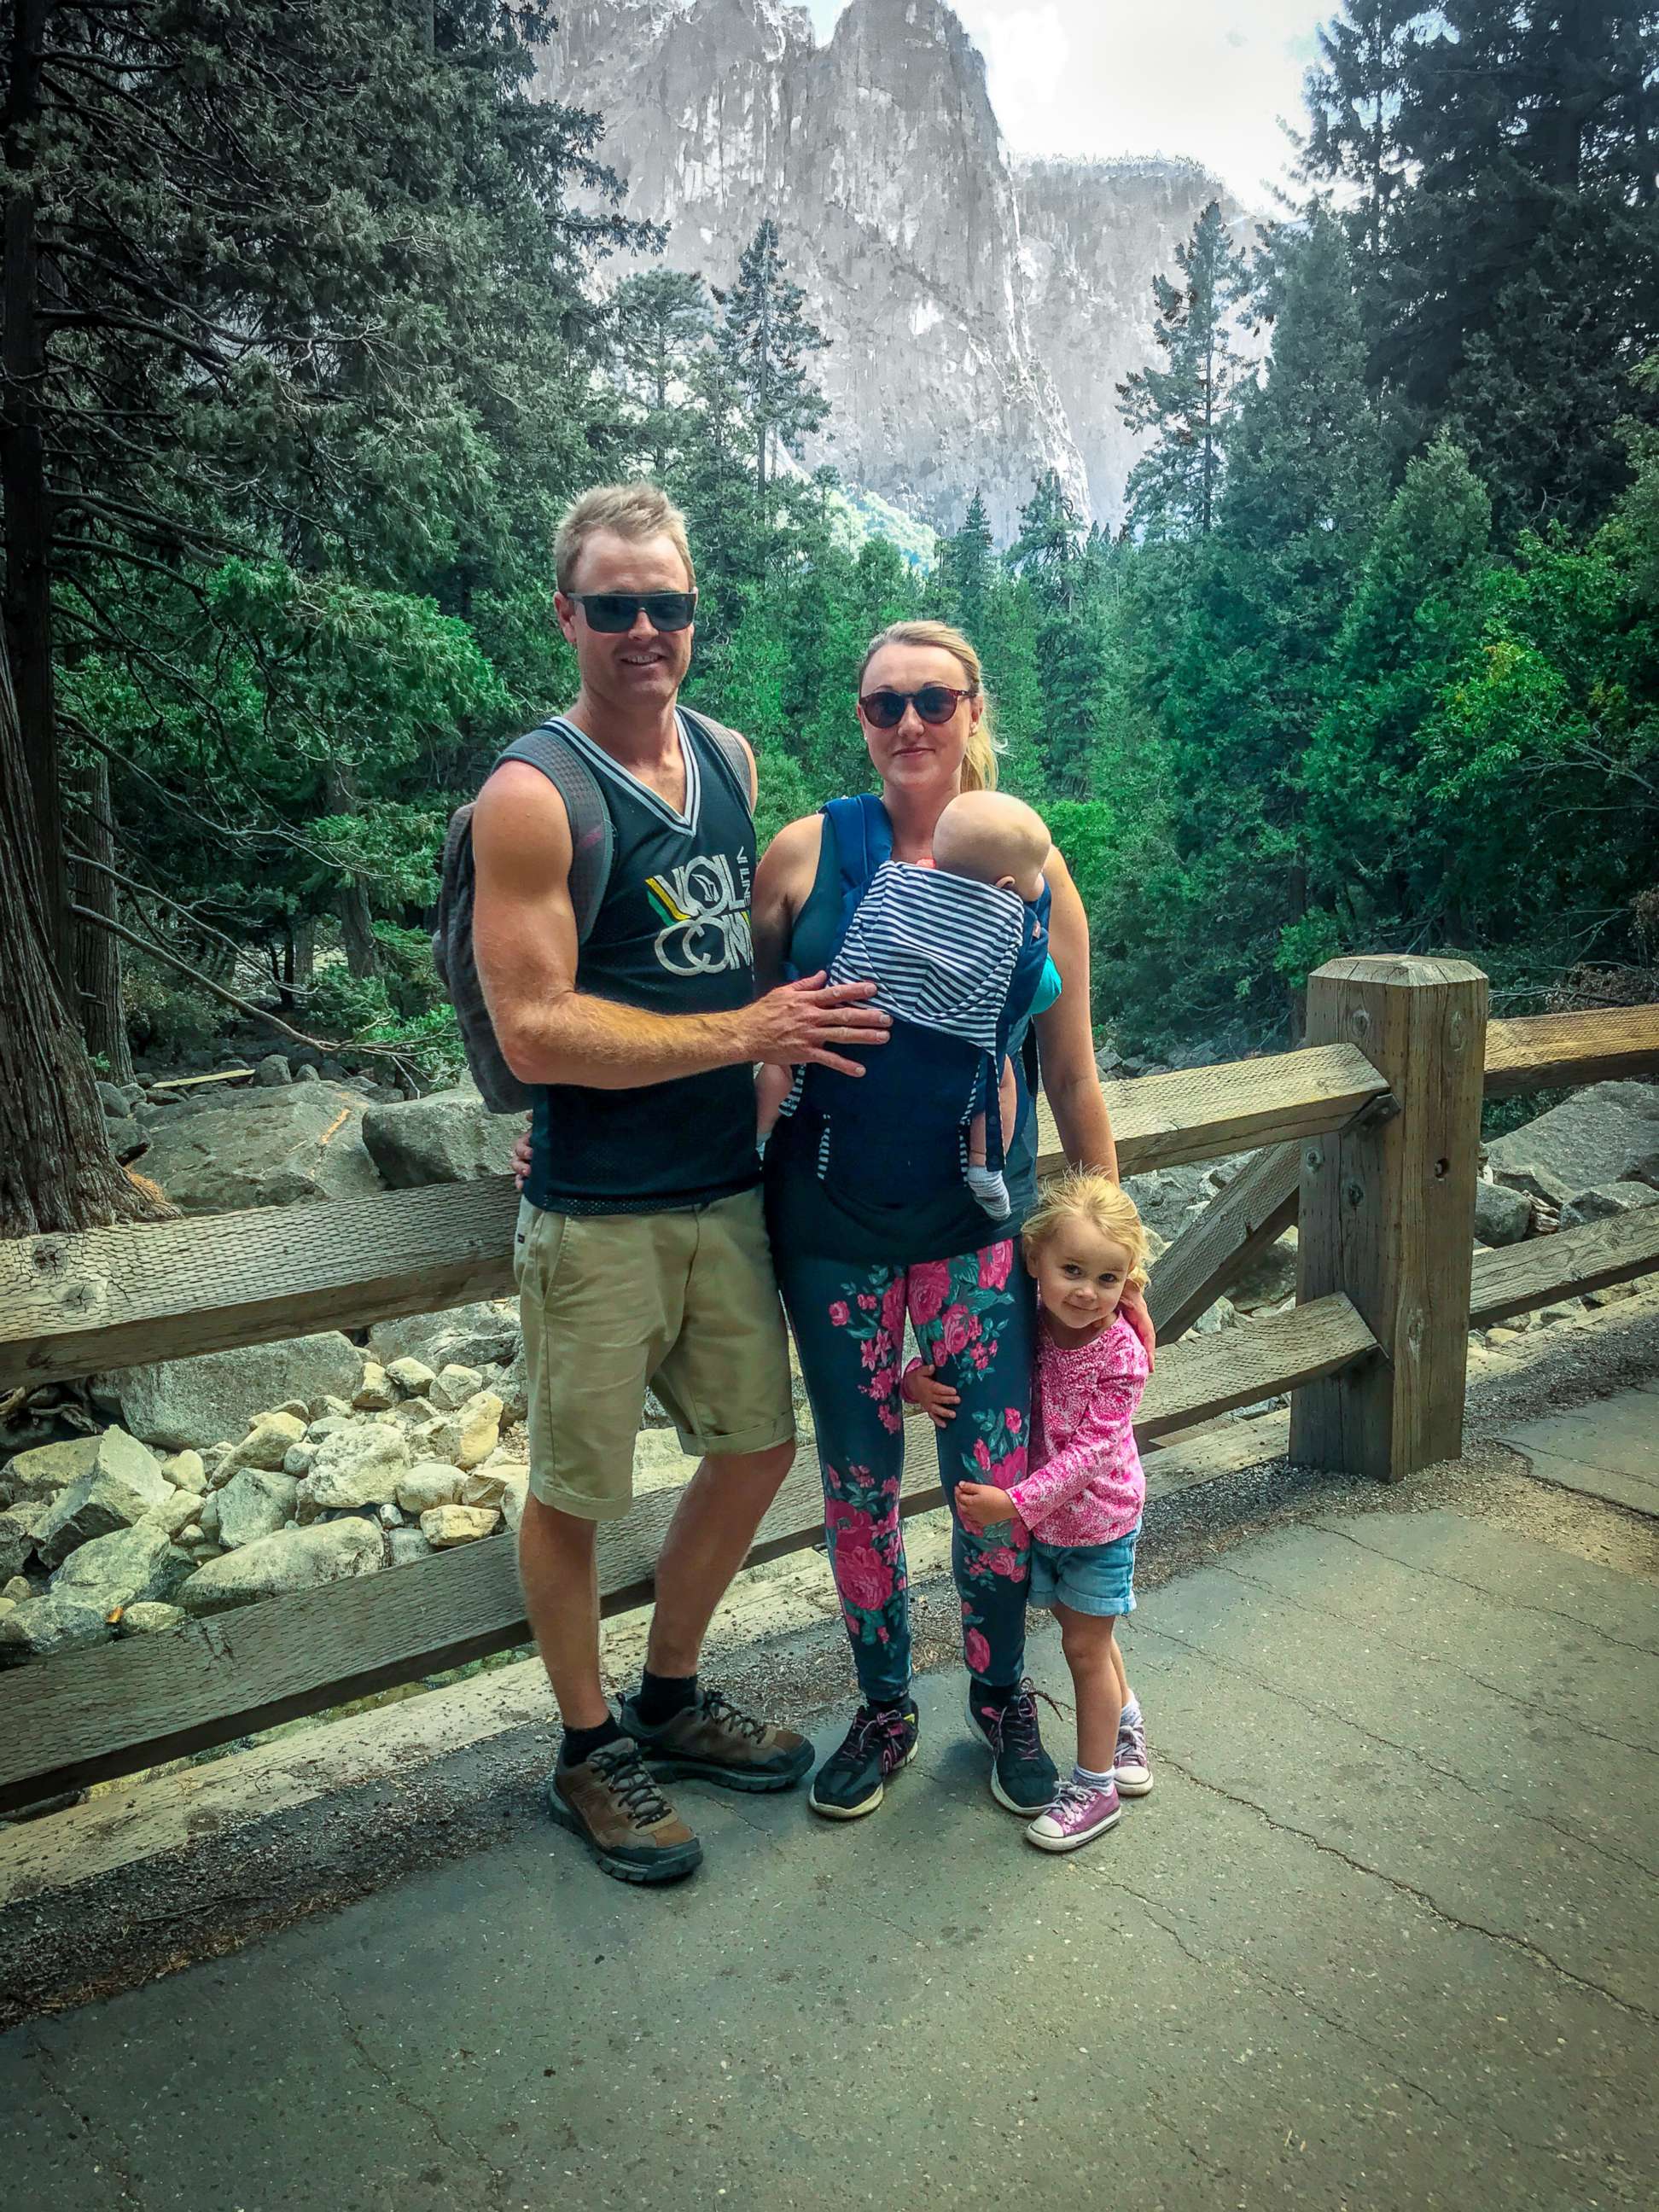 PHOTO: Karen Edwards and Shaun Bayes pose with their children, Esme and Quinn, at Yosemite National Park.